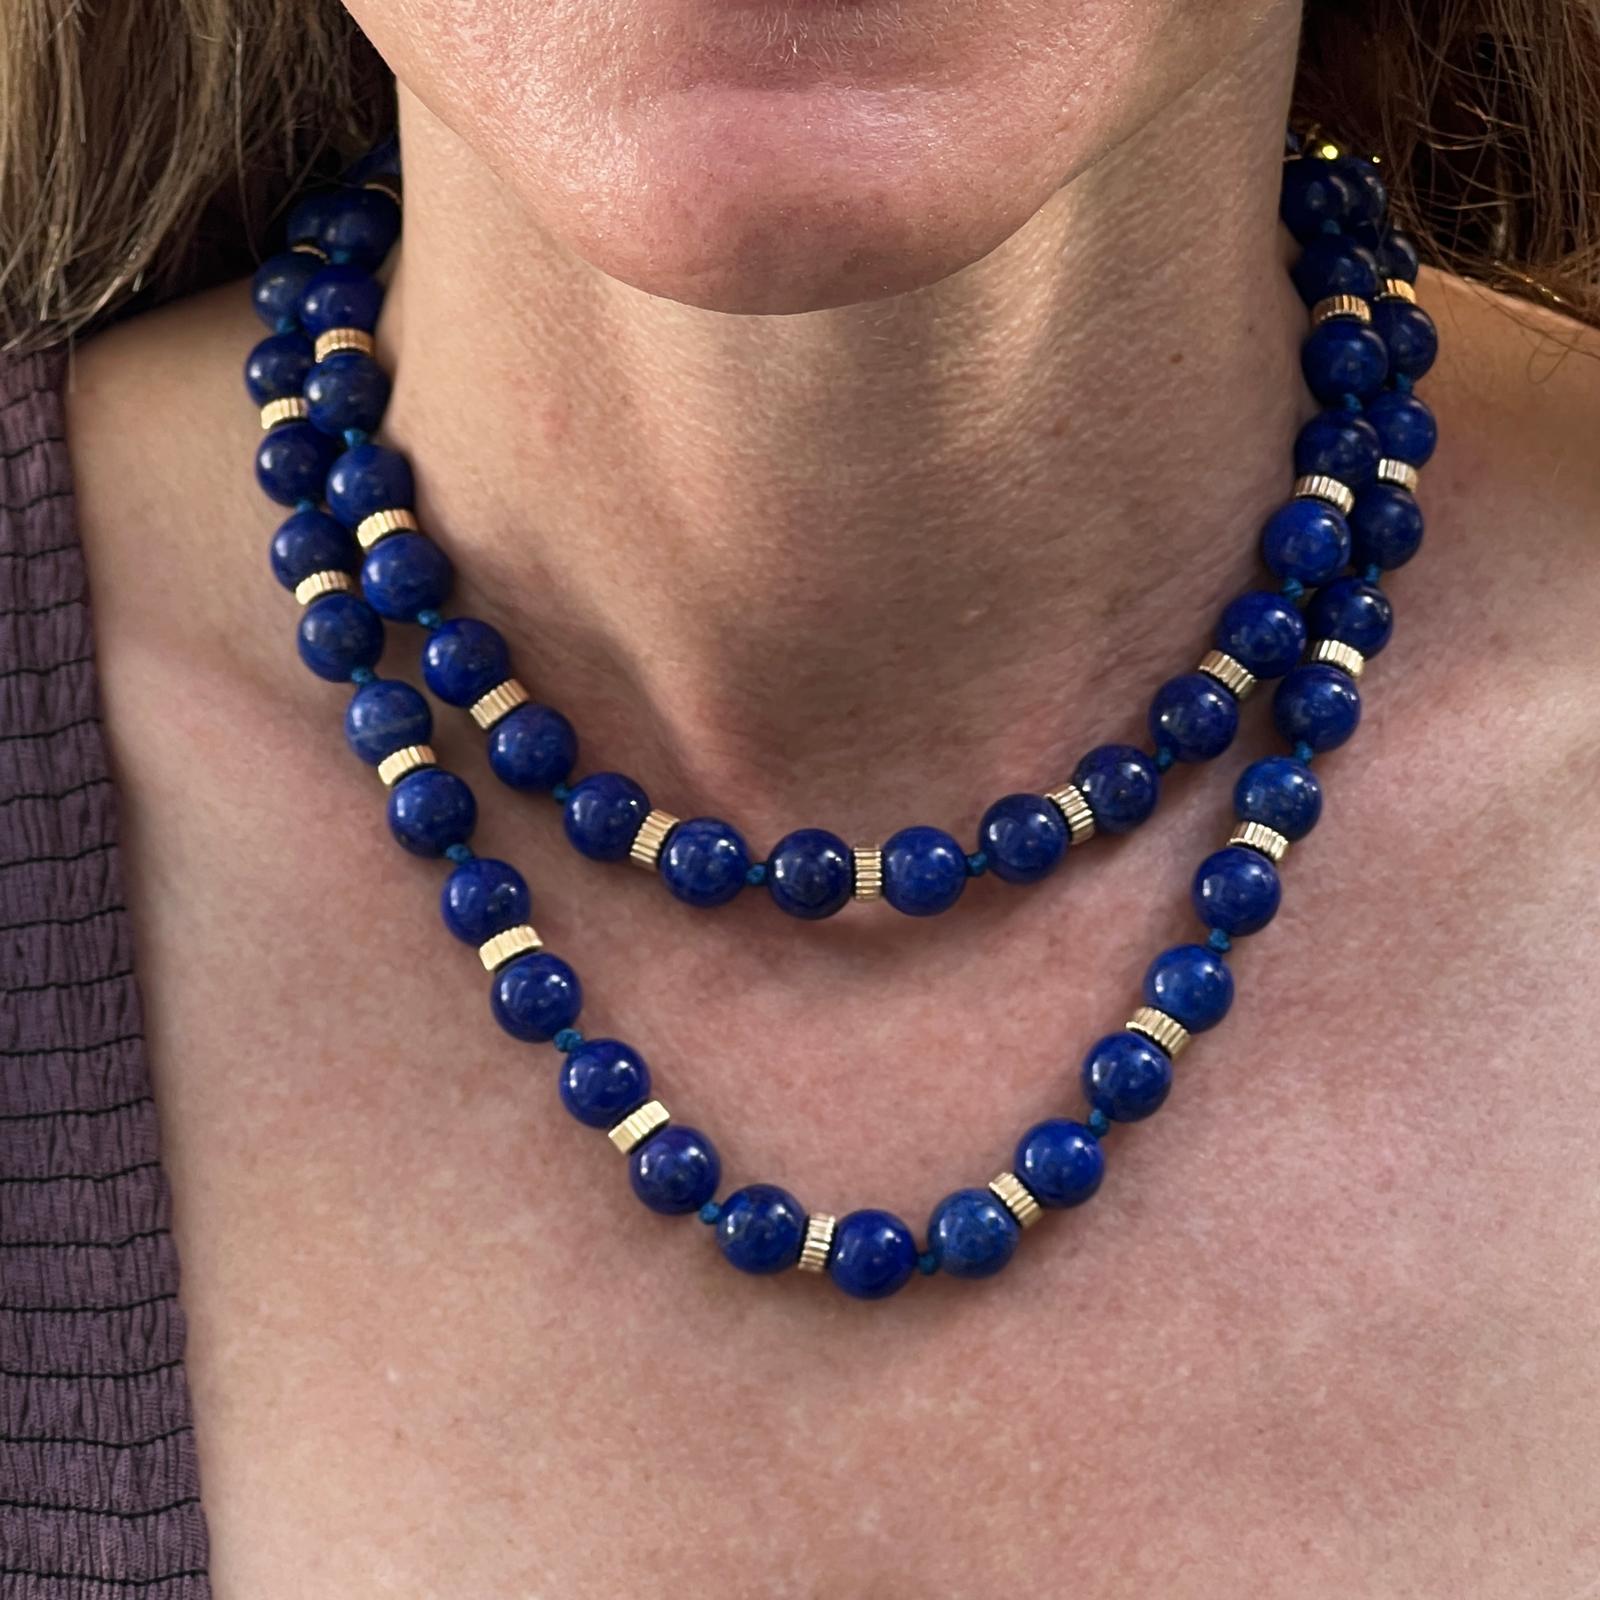 Authentic Tiffany & Co. Lapis Lazuli bead necklace fashioned in 18 karat yellow gold. The 32 inch necklace can be worn long or doubled. The beads measure approximately 10mm, and the gold rondels are ribbed. Clasp with safety signed T&Co. 18K. 